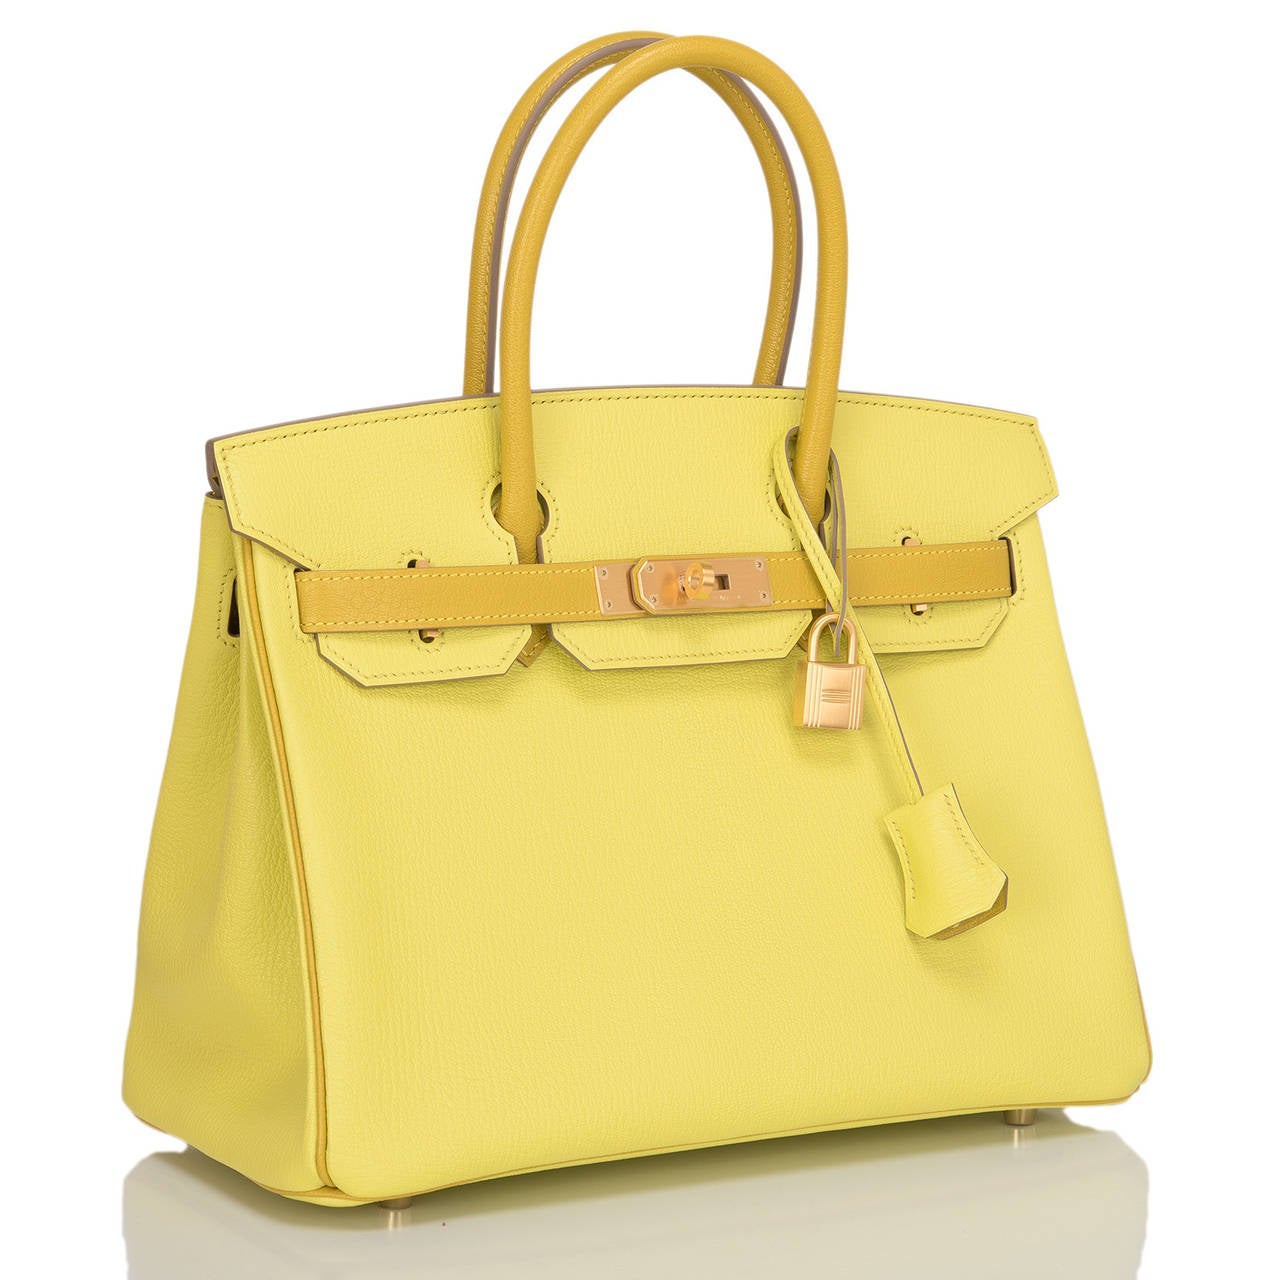 Hermes Bi-color Special Order Horseshoe Soufre in togo leather with brushed gold hardware.

This Special Order Birkin features a front toggle closure, clochette with lock and two keys, and double rolled handles. The interior is lined in Cumin